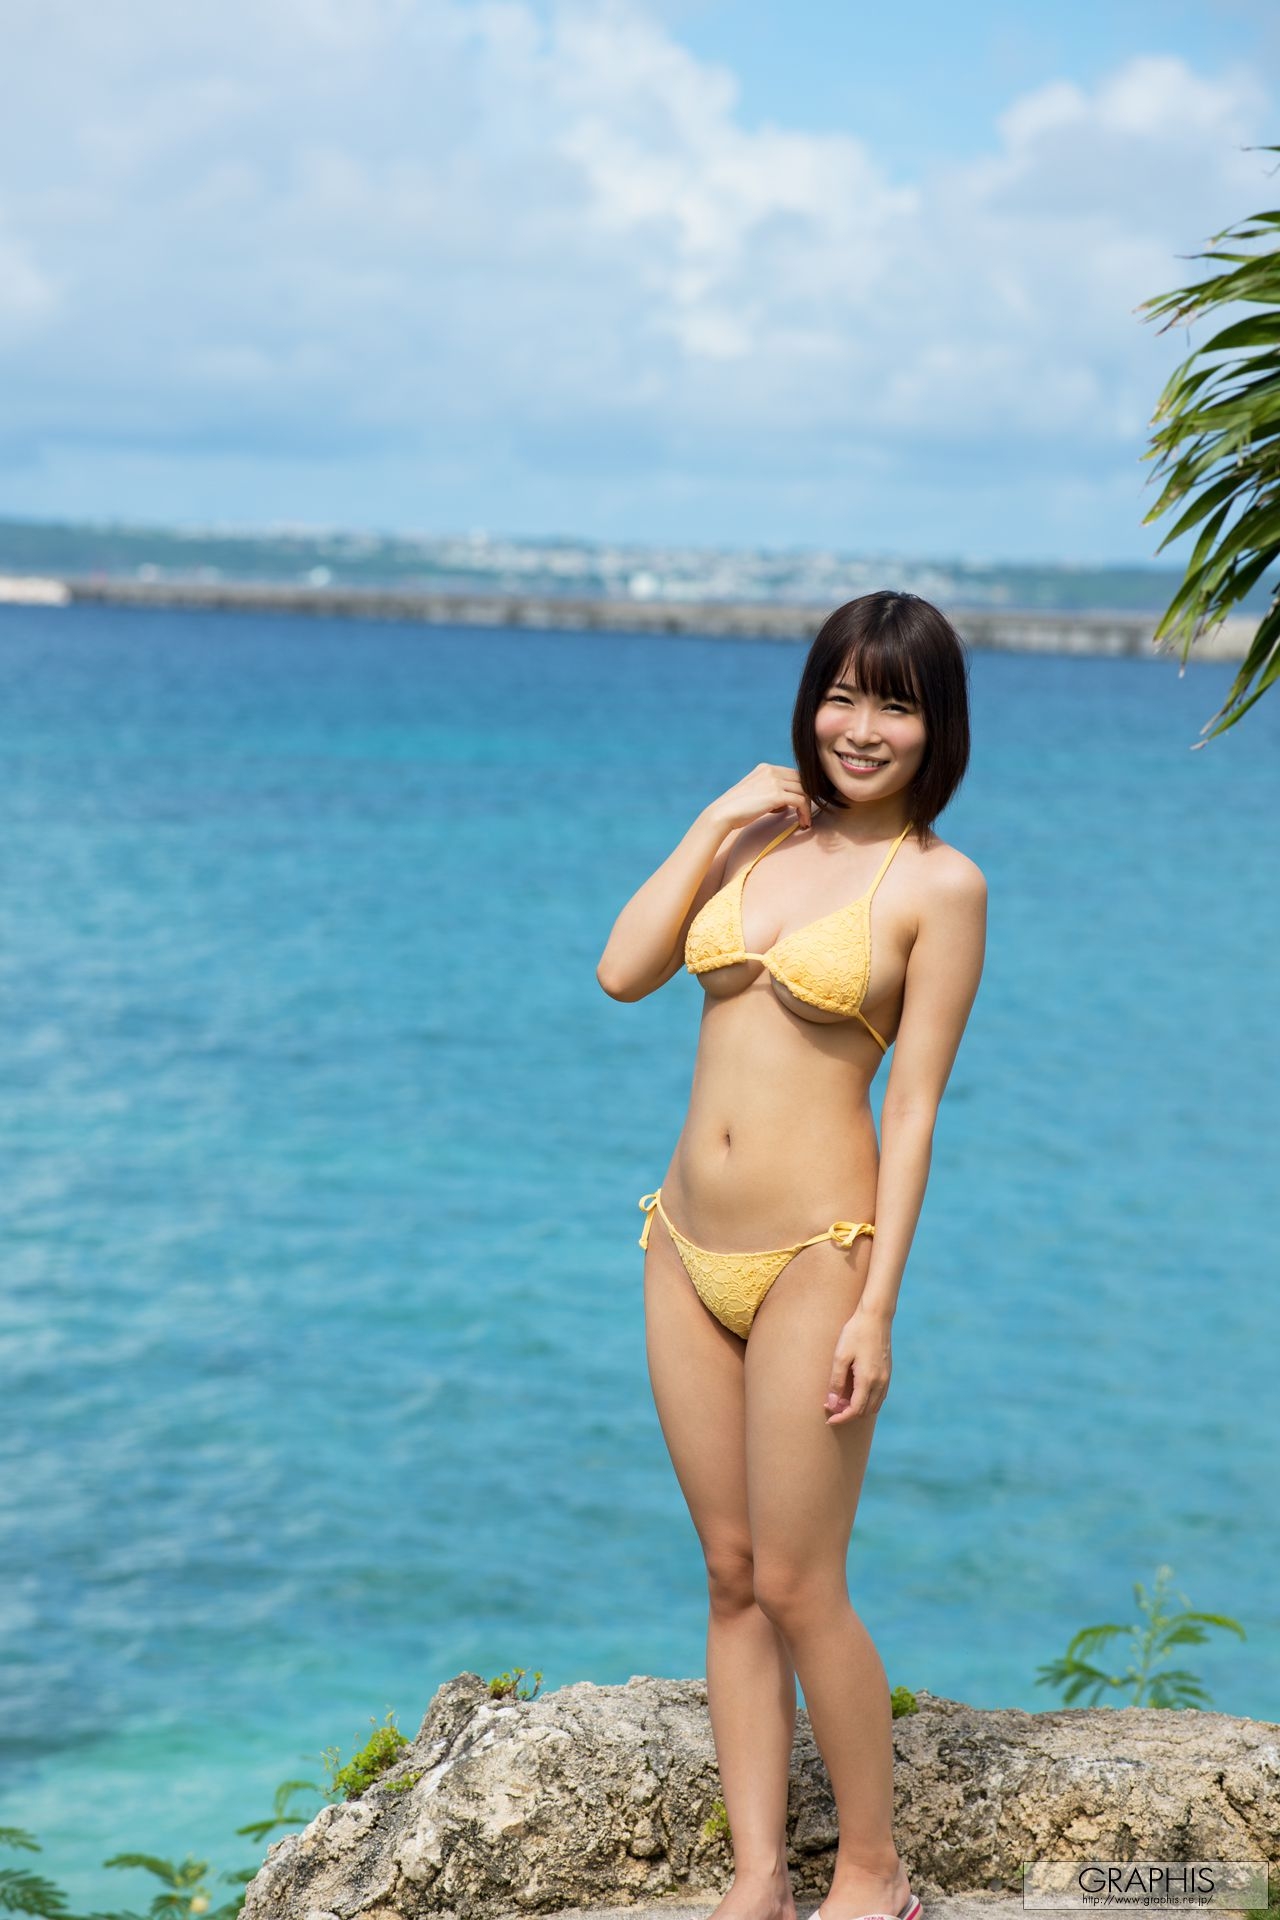 [Graphis] Gals444 河合あすな《Godly beautiful breast》 